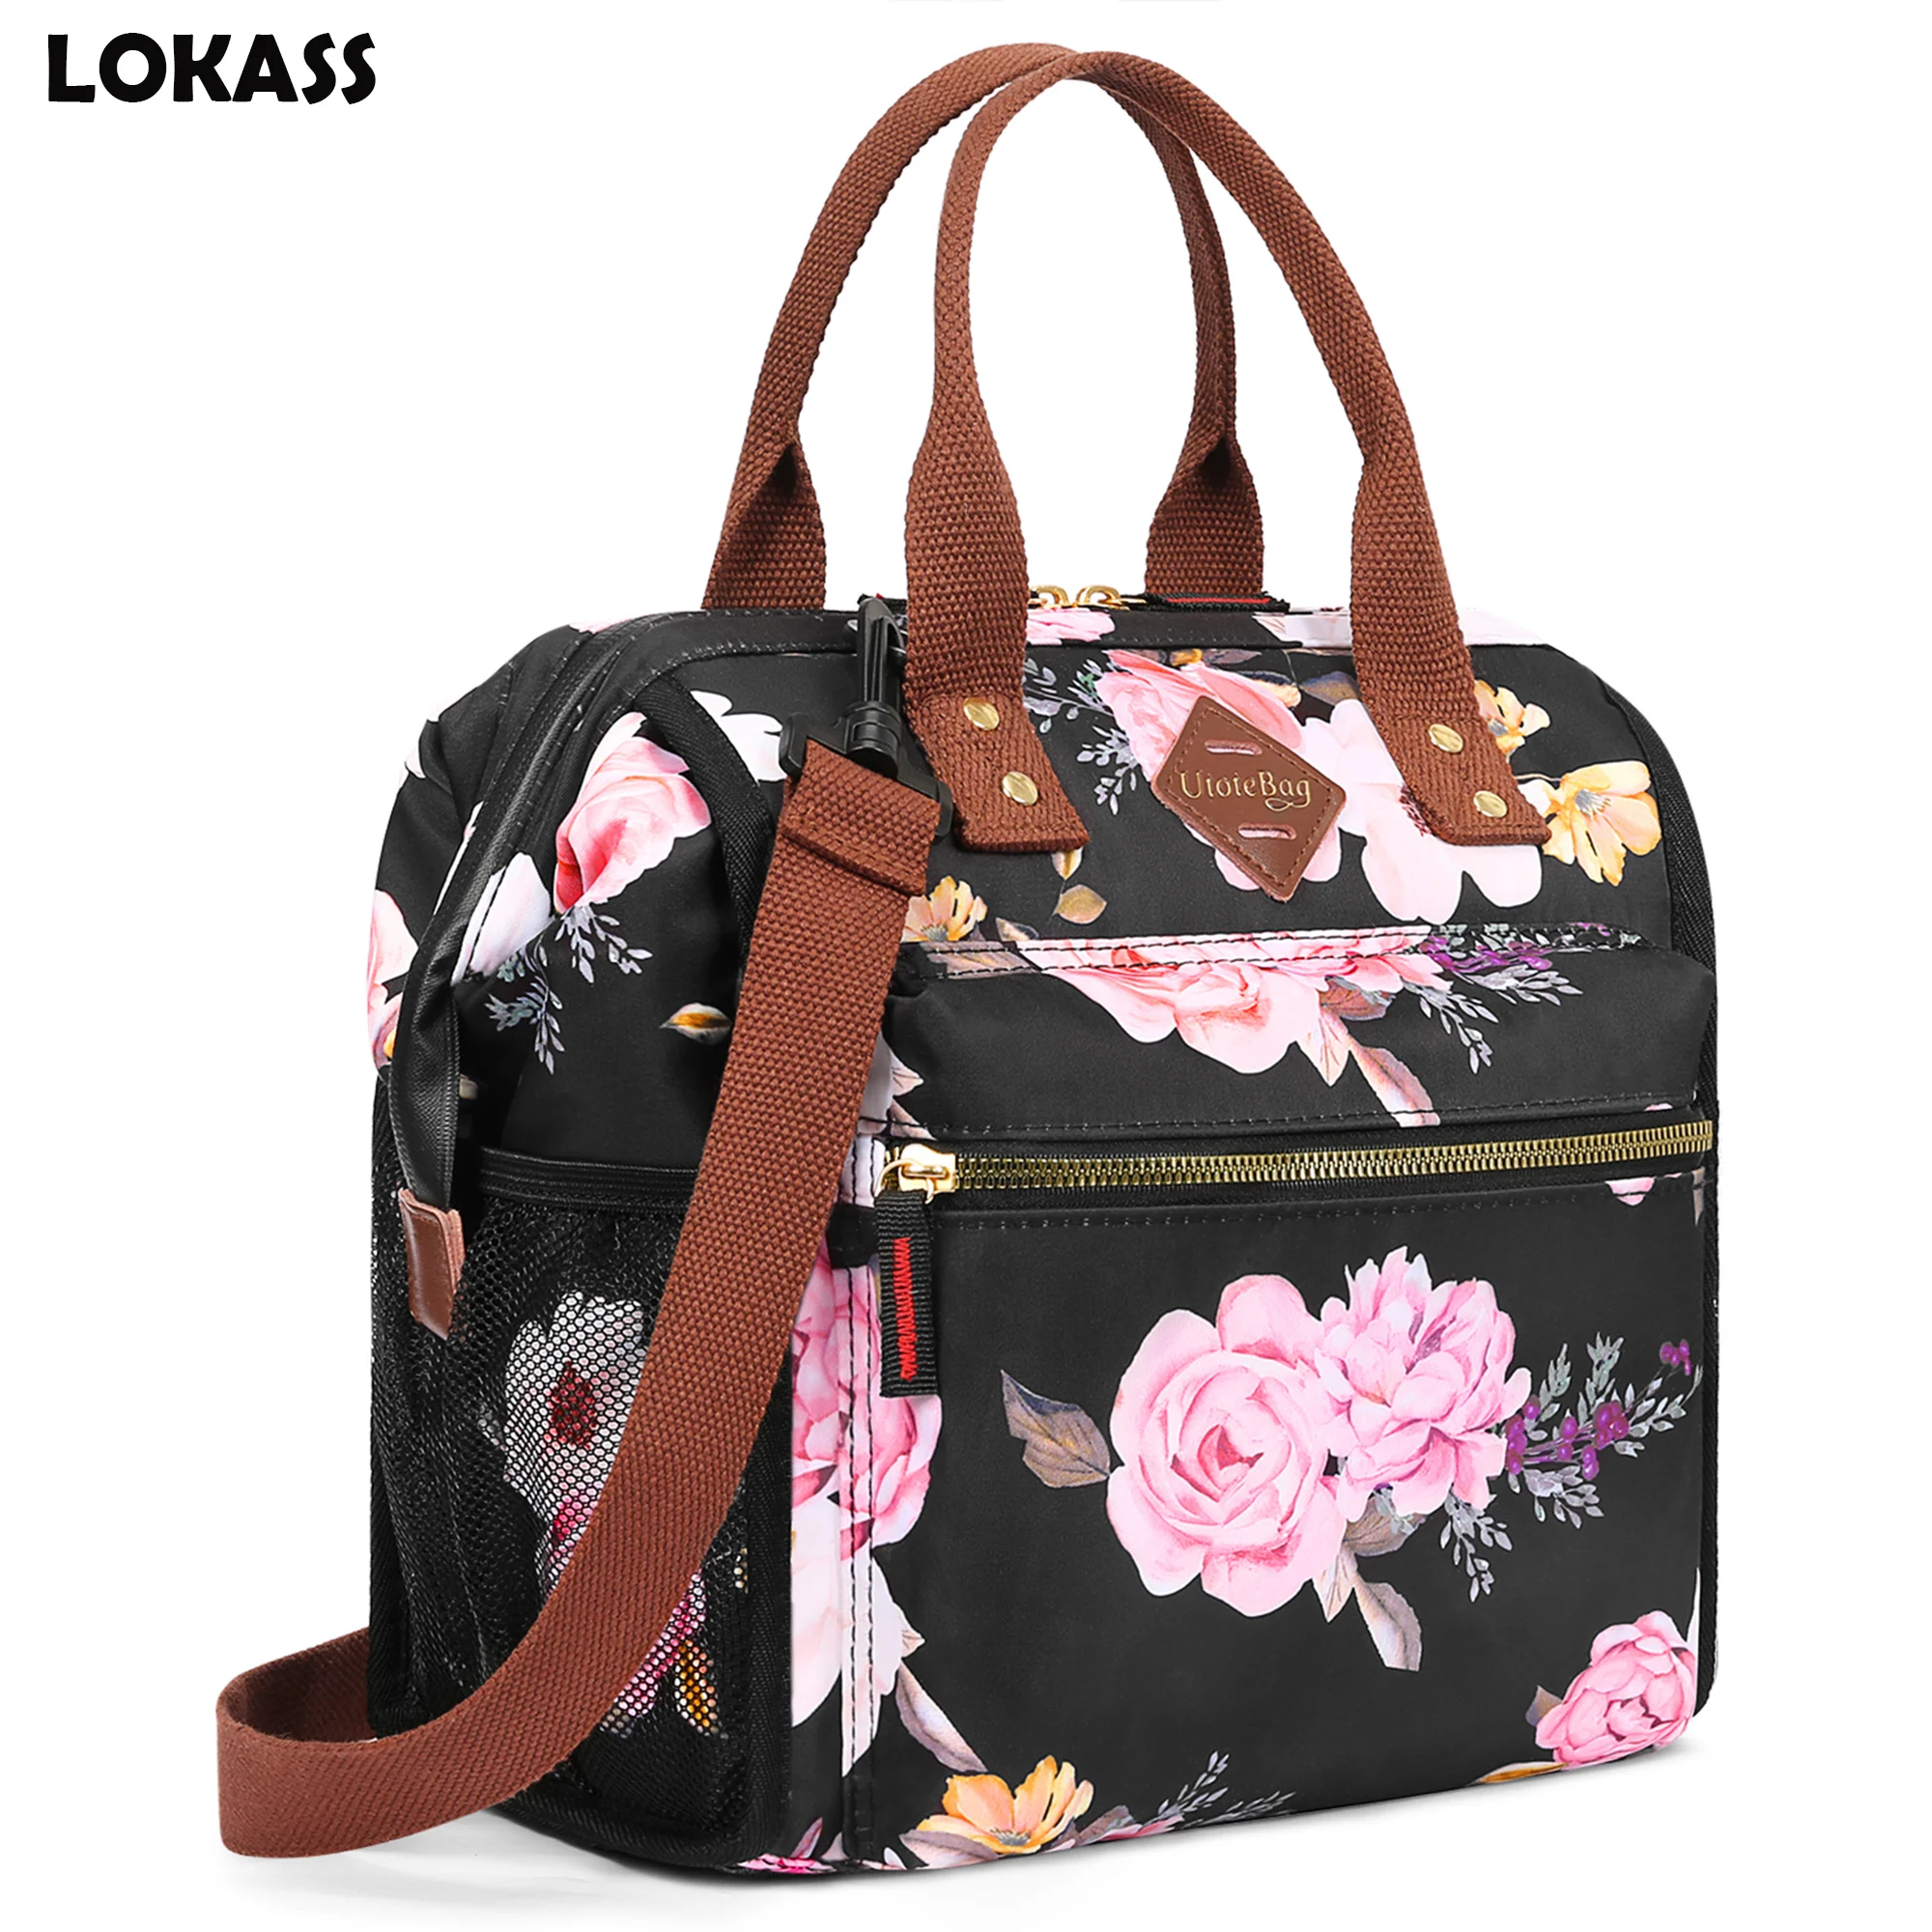 lokass lunch bag women insulated lunch box water resistant lunch tote thermal lunch cooler soft liner lunch bags for girls lady LOKASS Lunch Bag Women Insulated Lunch Box Water-resistant Lunch Tote Thermal Lunch Cooler Soft Liner Lunch Bags for Girls Lady